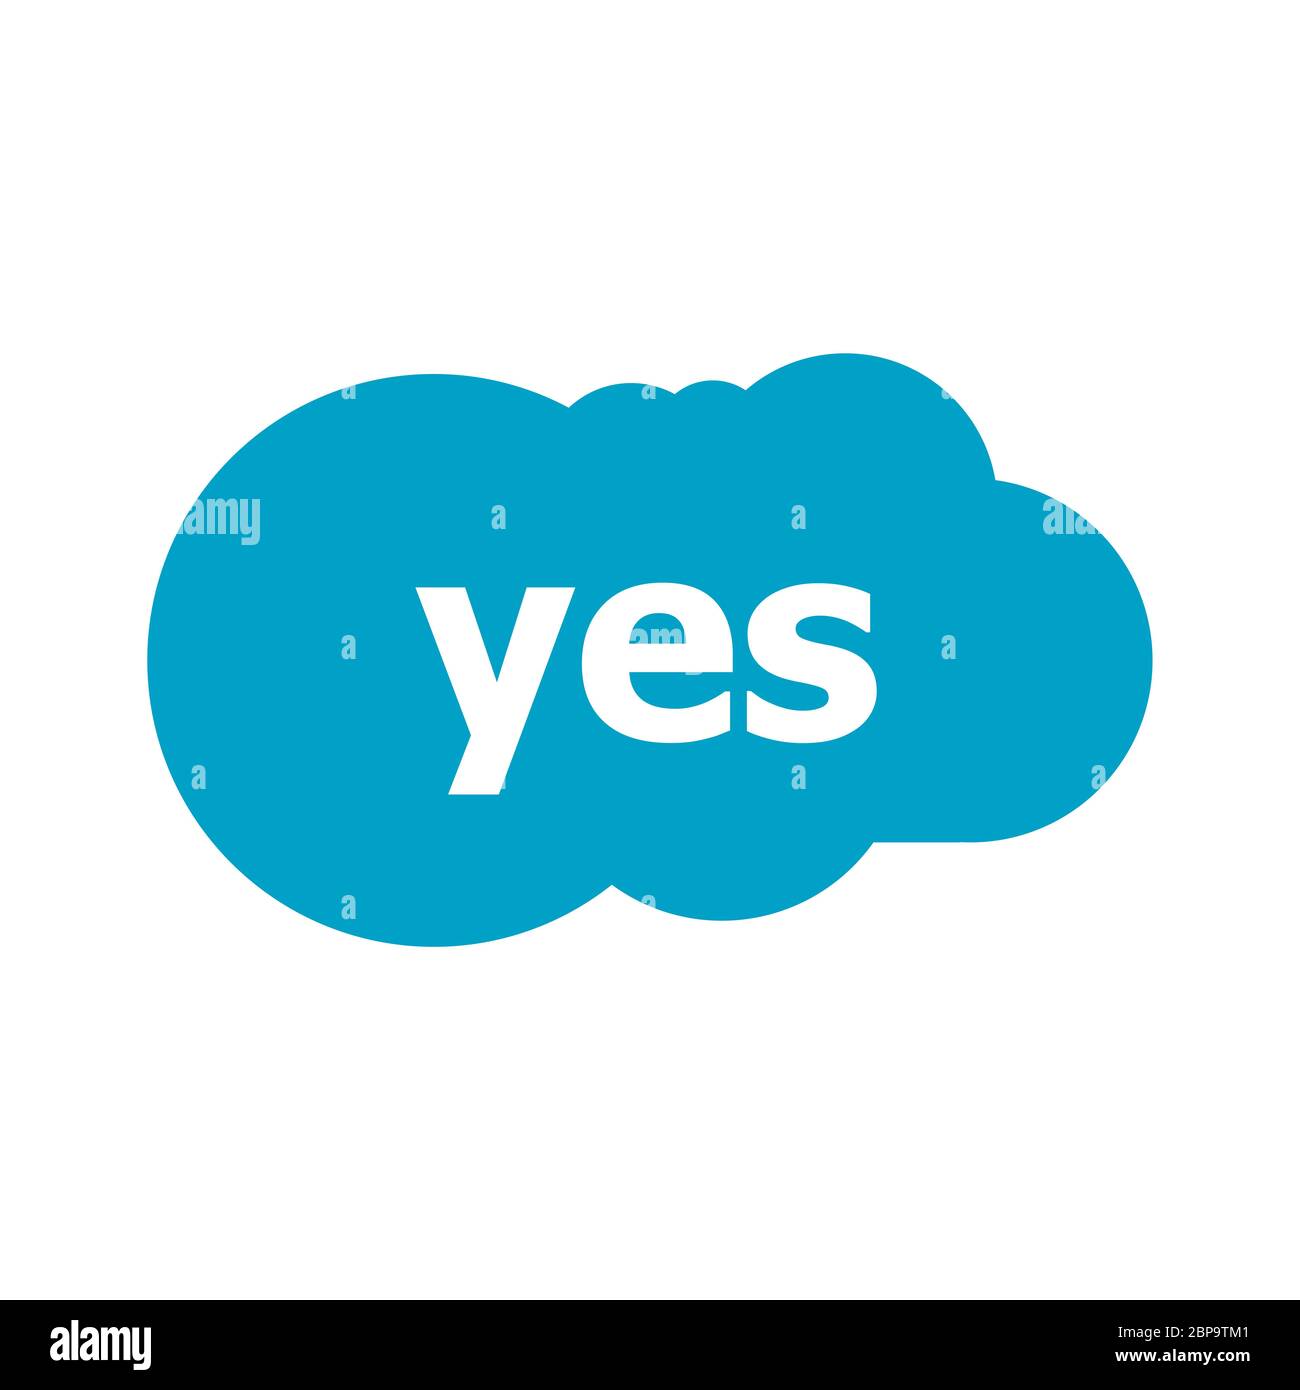 Yes word on talk shape. Blue and white color. No in speech bubble on white background. Design element for badge, sticker, mark, symbol icon and card c Stock Photo